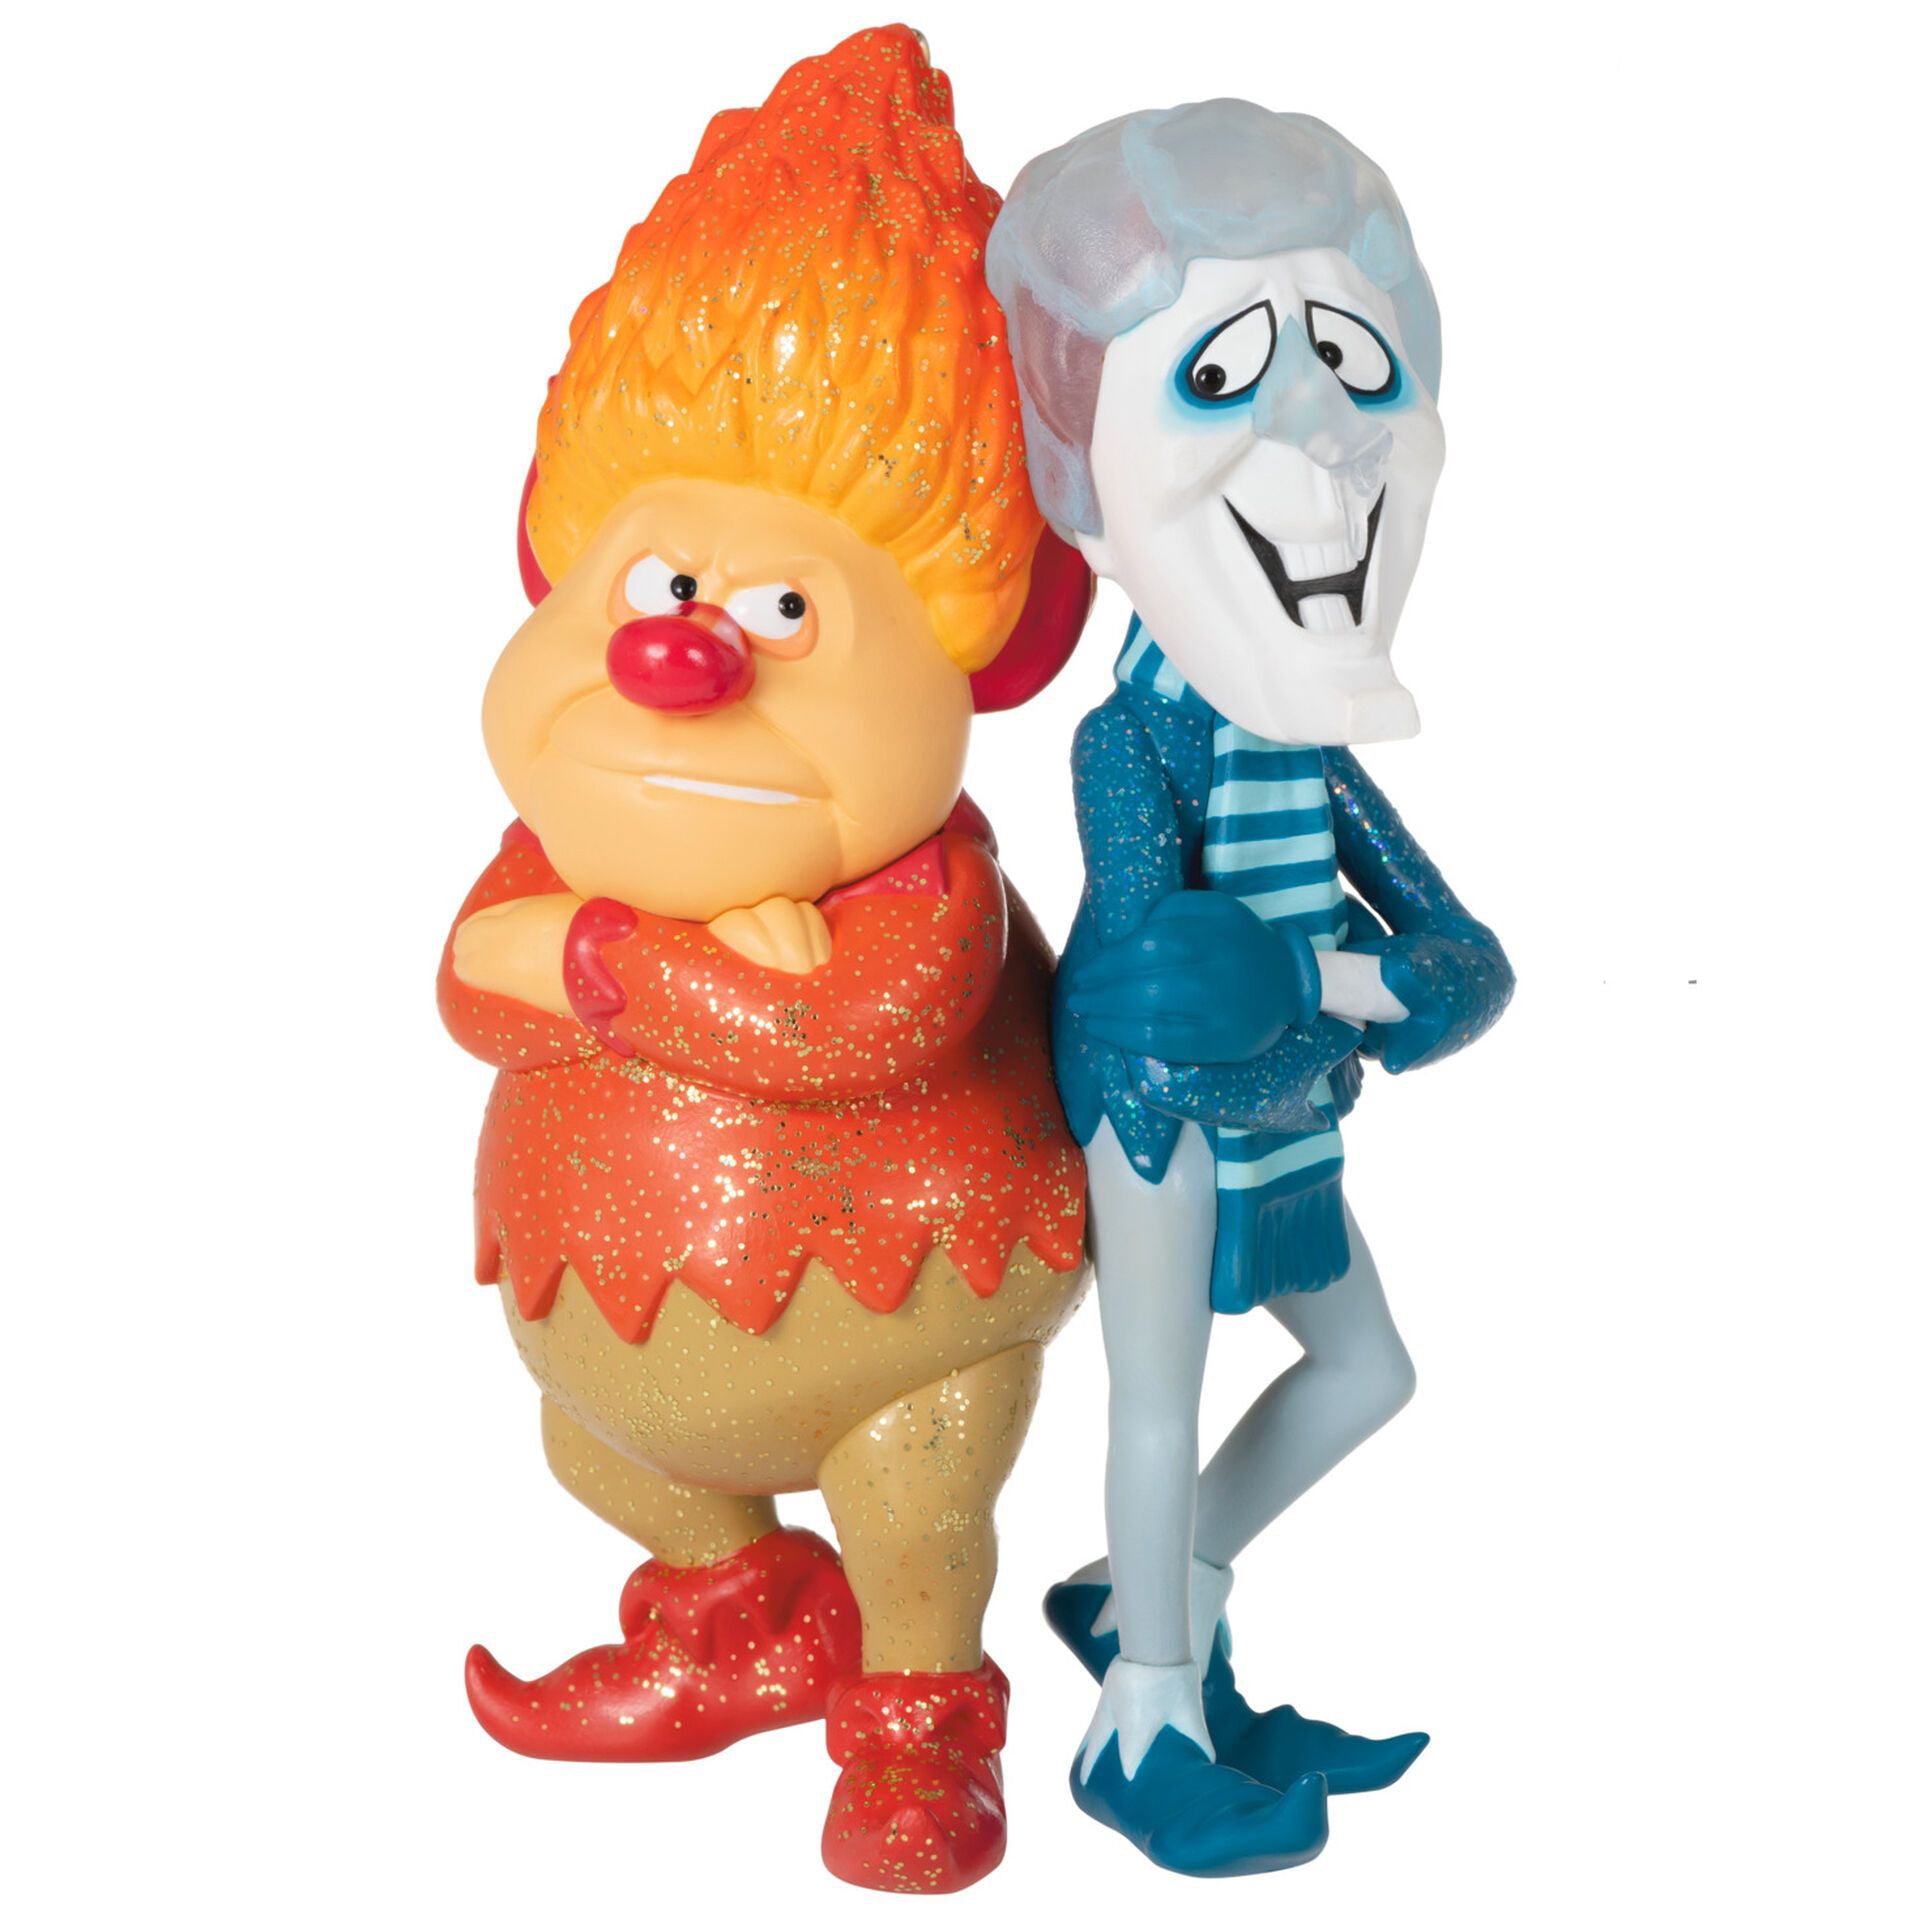 2021 Hallmark The Year Without A Santa Claus Snow Miser And Heat Miser